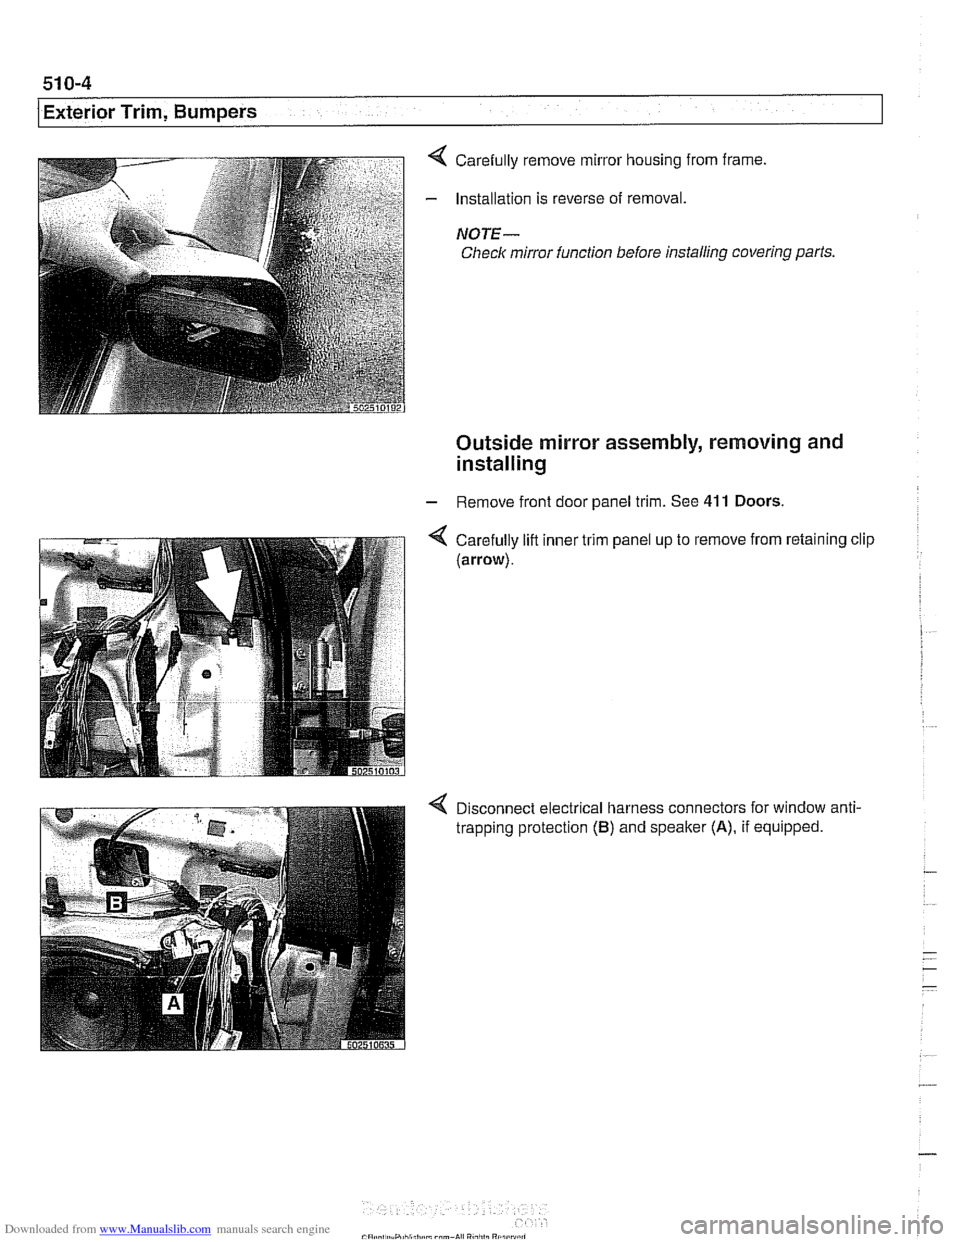 BMW 525i 2001 E39 Workshop Manual Downloaded from www.Manualslib.com manuals search engine 
51 0-4 
I Exterior Trim. Bumpers 
4 Carefully remove mirror housing from frame 
- Installation  is reverse  of removal. 
NOTE- 
Check  mirror 